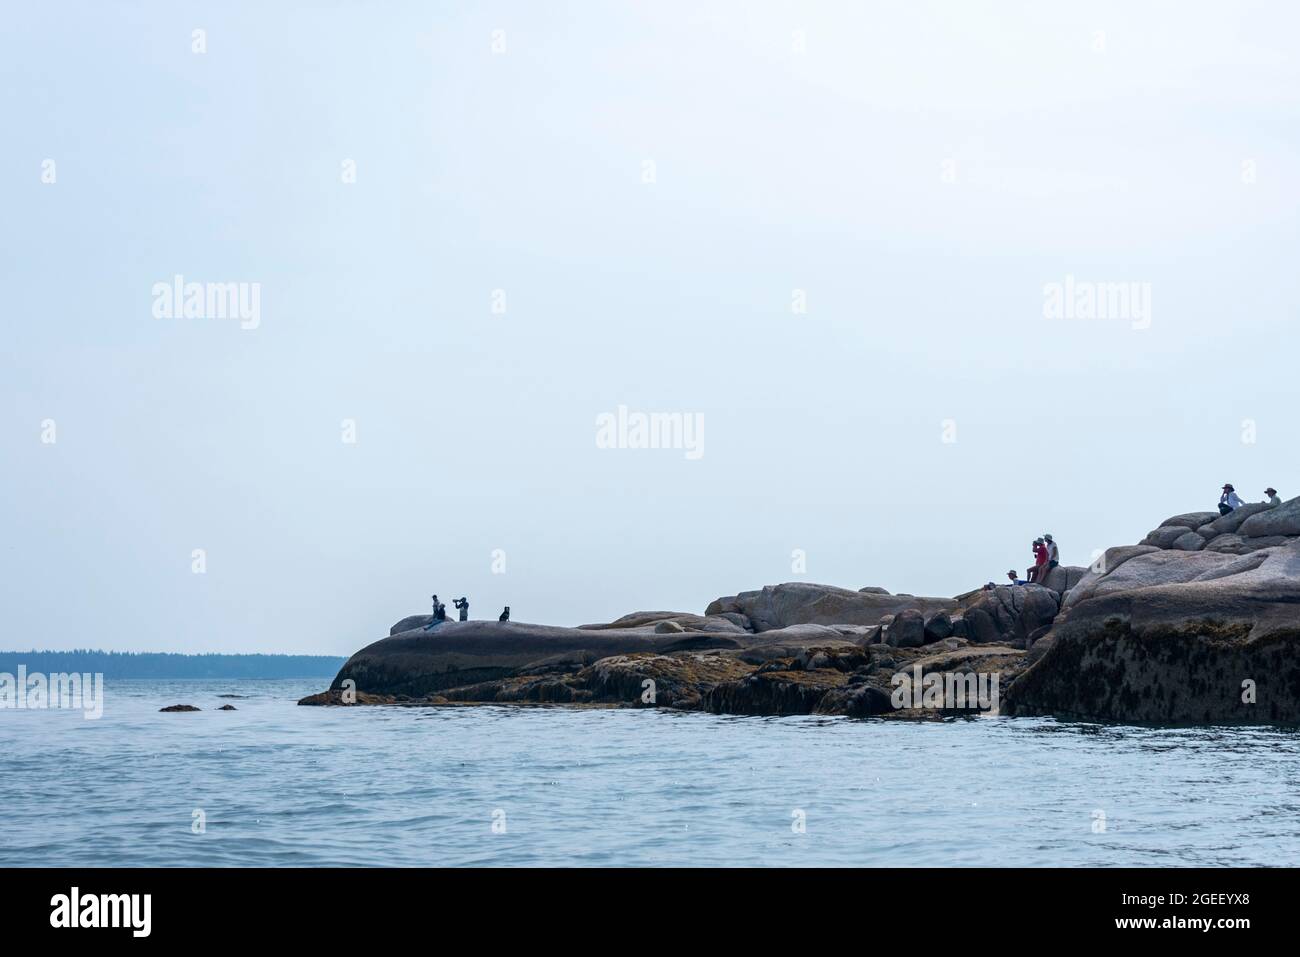 Group of People at Water's Edge on Rocks Stock Photo